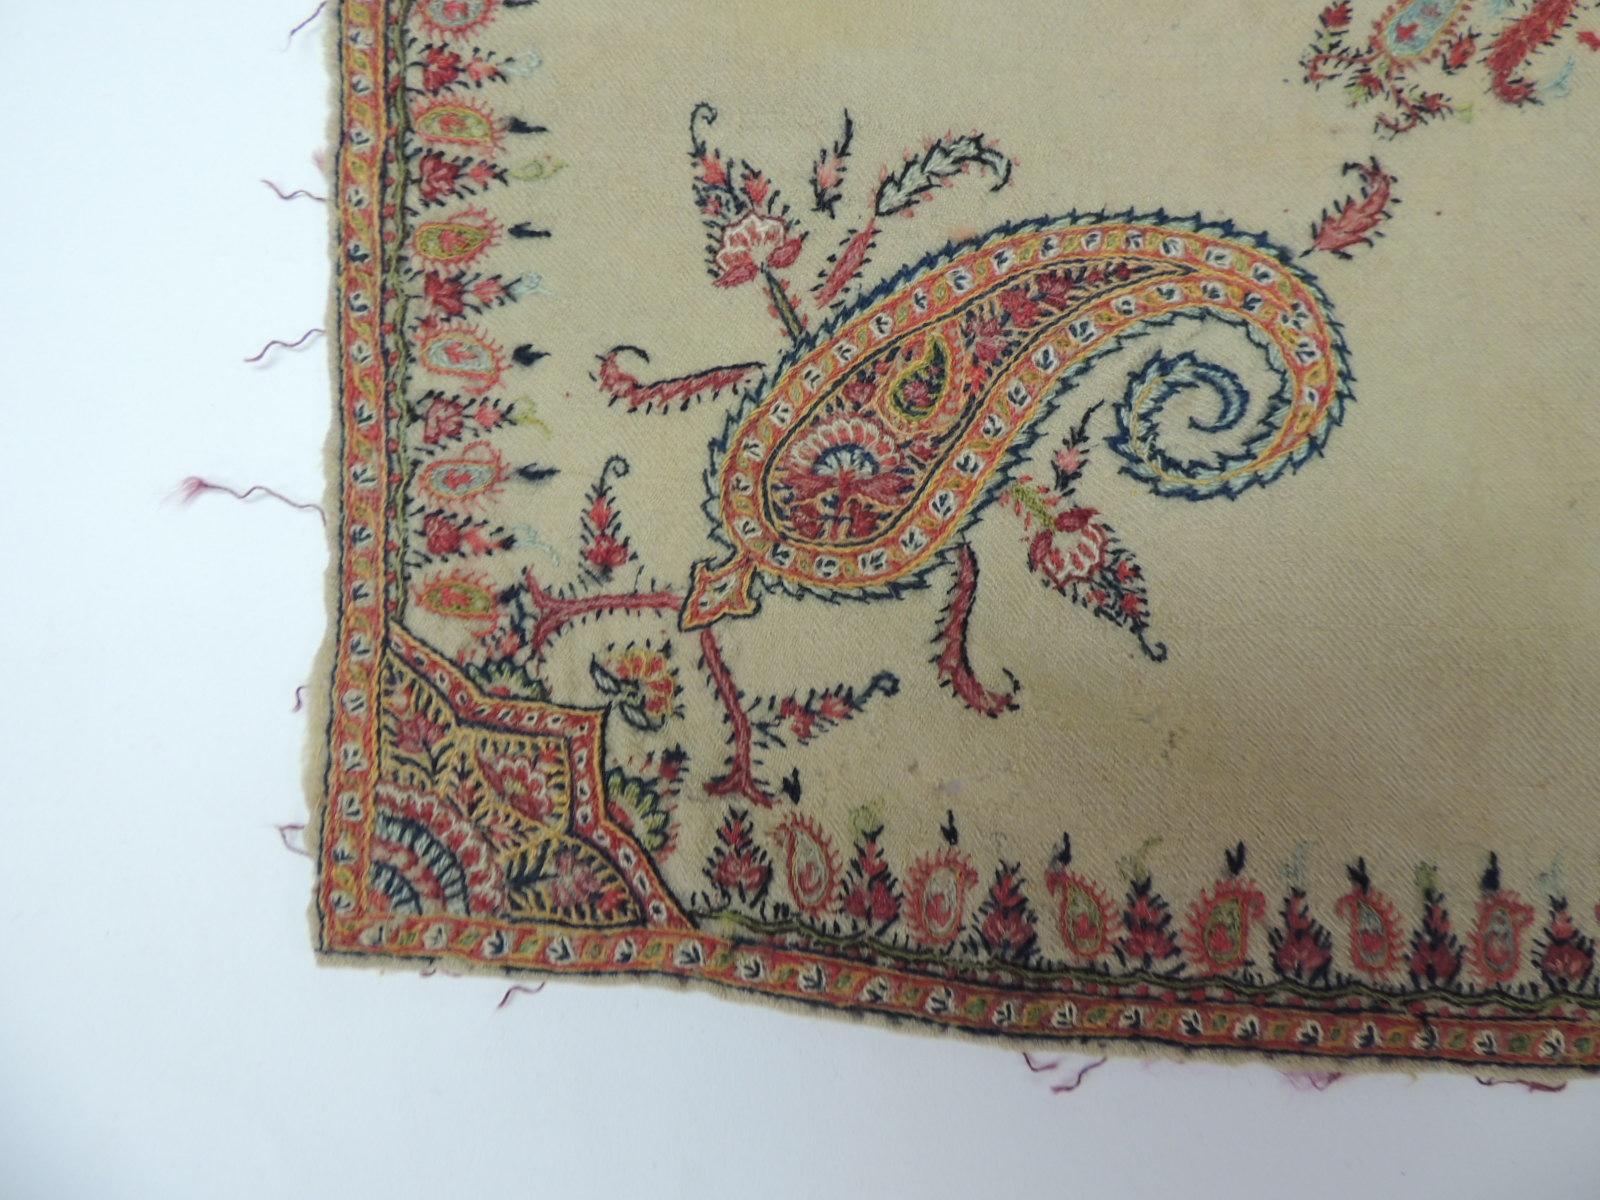 19th century Indian hand-embroidered wool cloth with paisley details on all four sides and center medallion.
Note: some fading and small holes due to age. In shades of hunter green, red, blue, orange, yellow and green.
Ideal for a sofa, table or